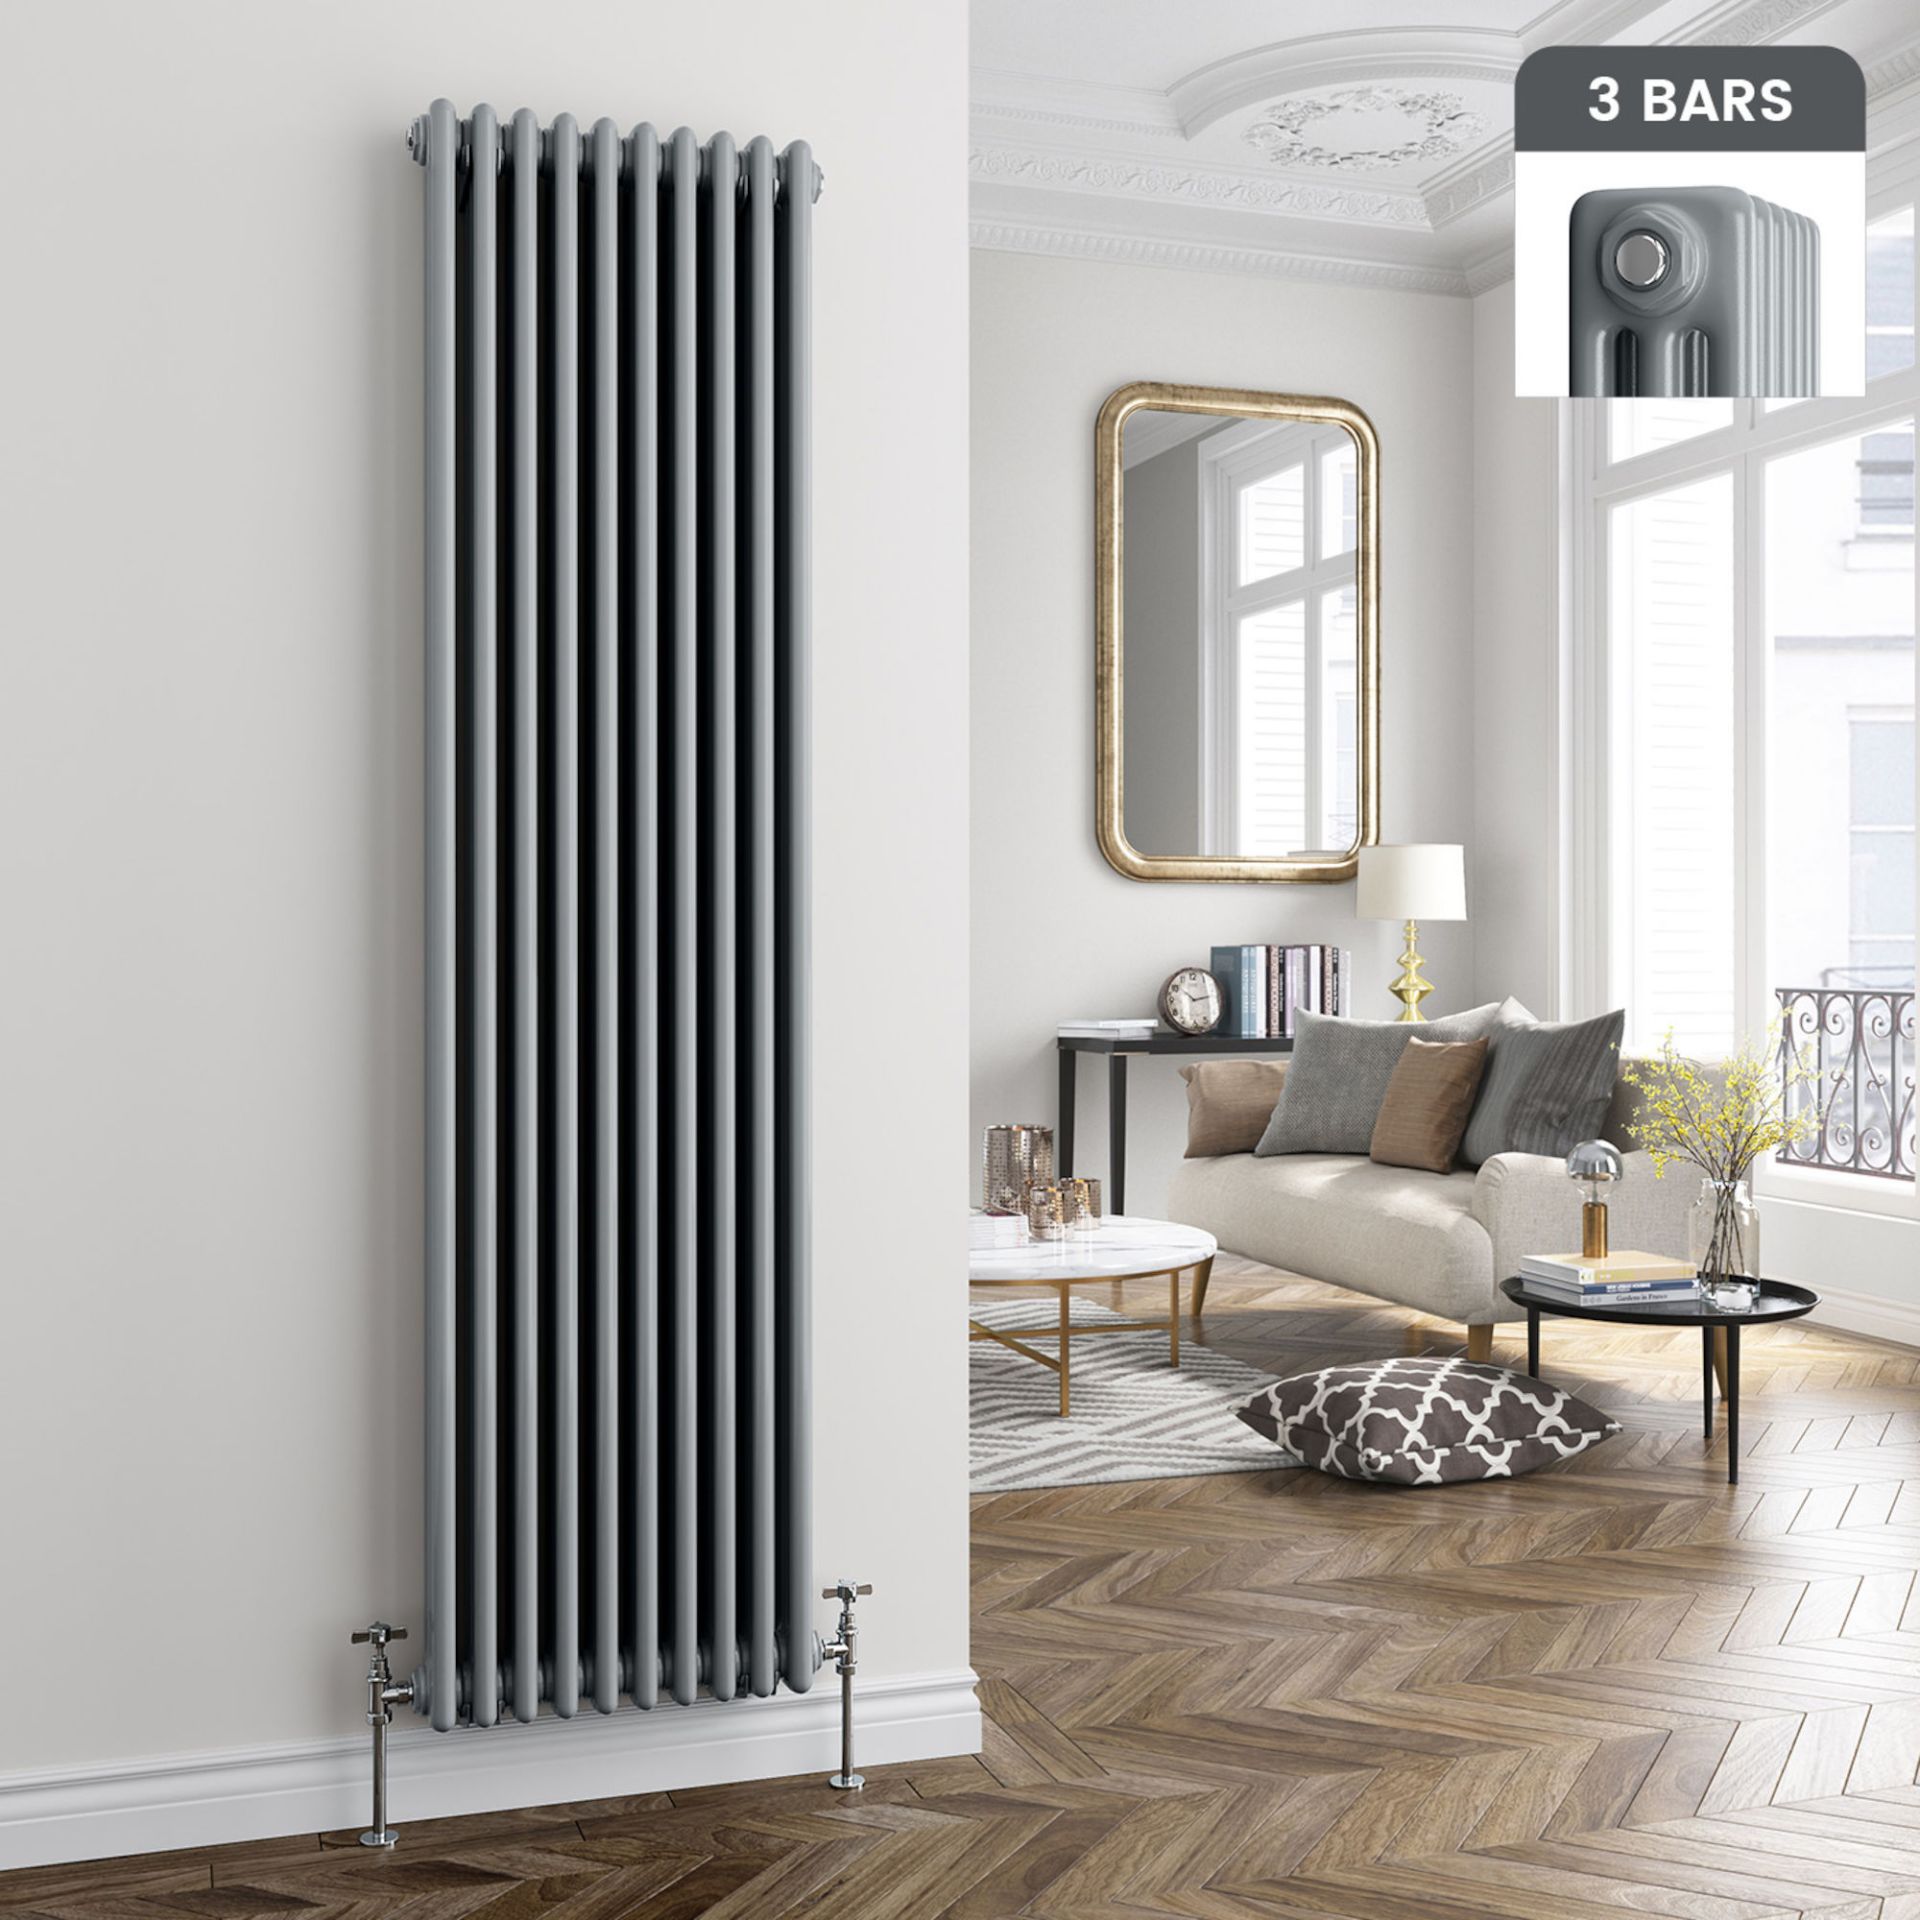 (VN191) 1800x468mm Earl Grey Panel Vertical Colosseum Traditional Radiator. RRP £484.99. Made from